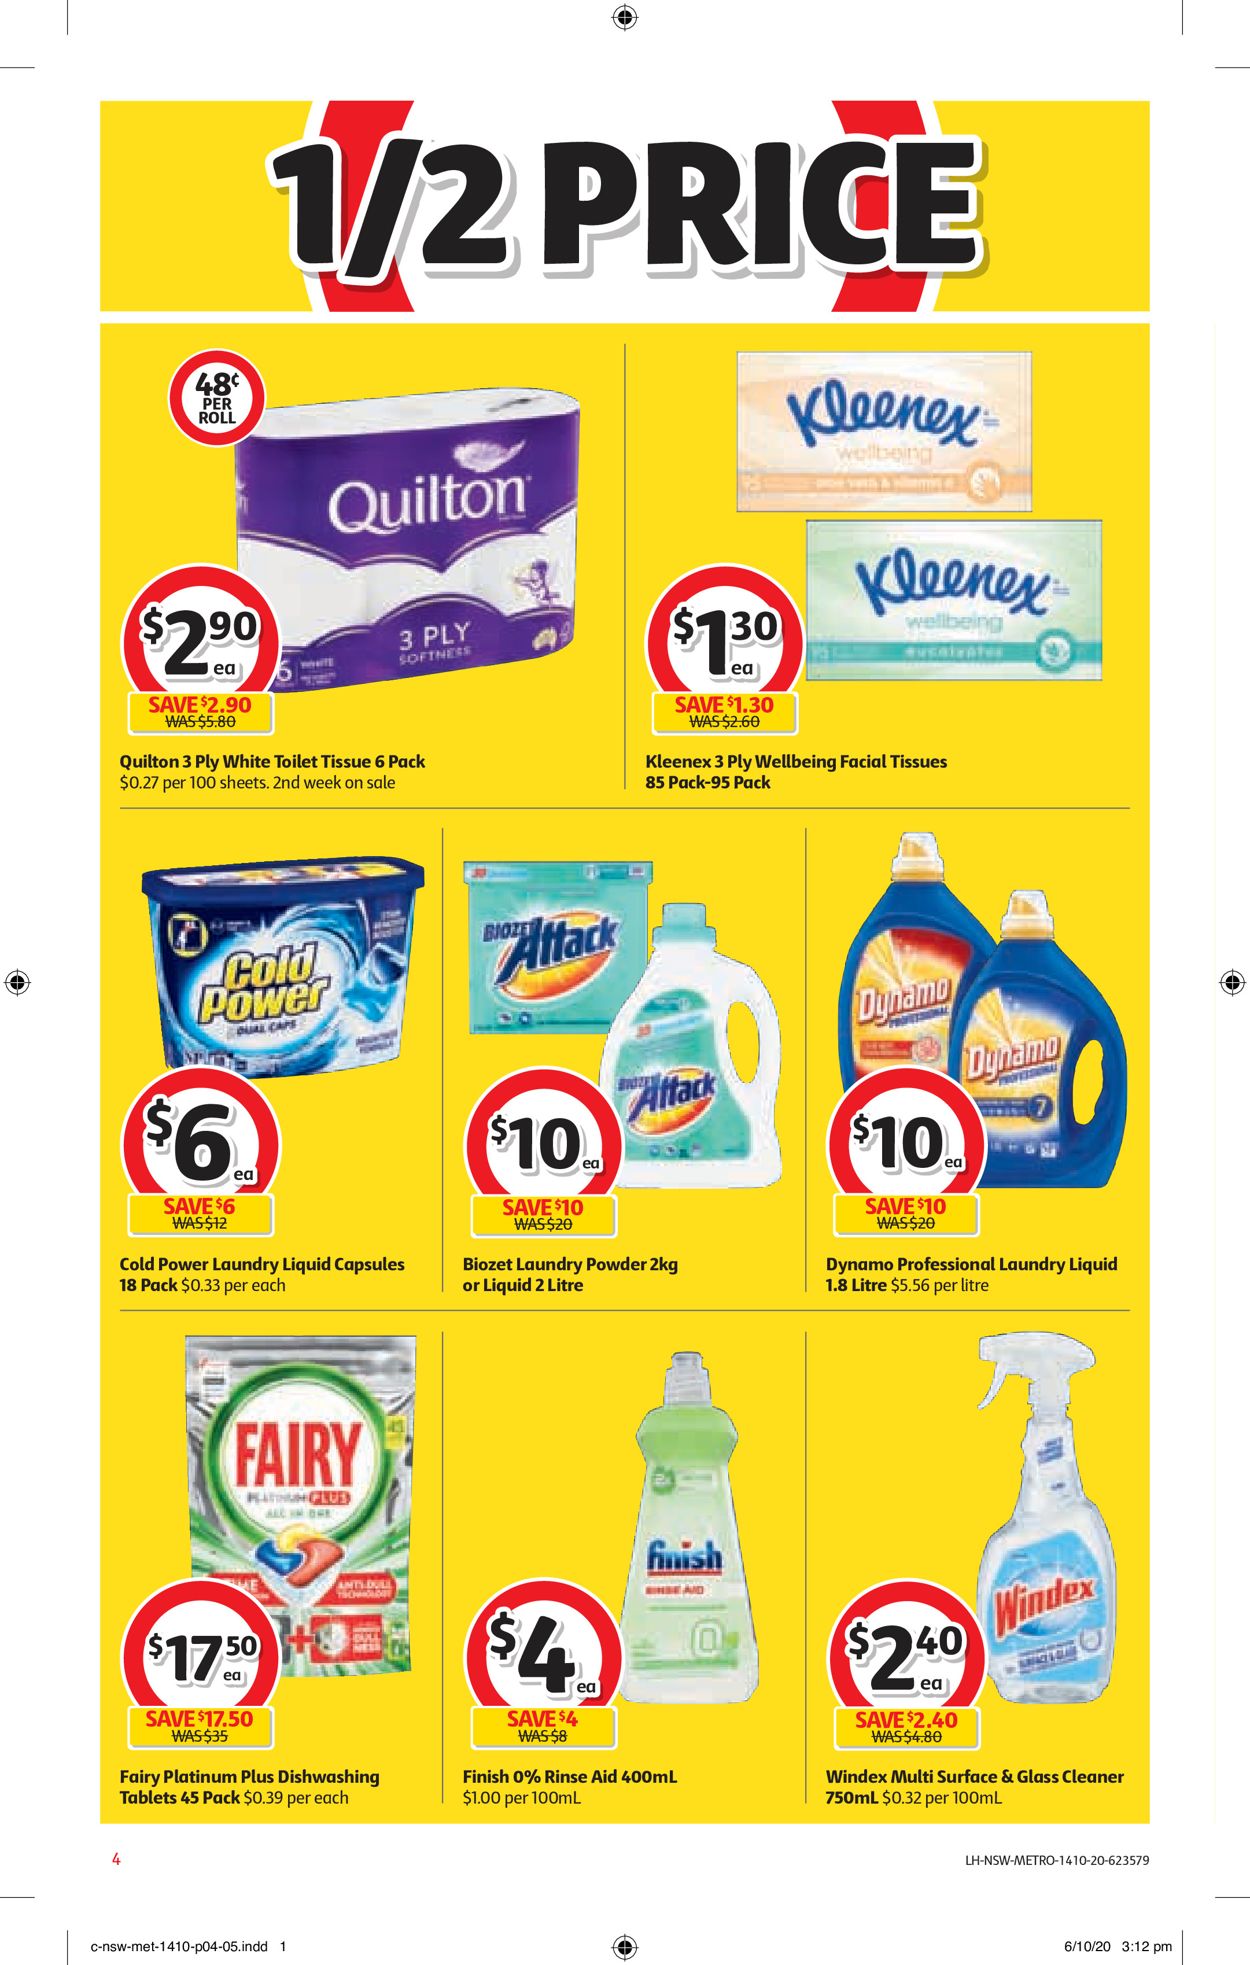 Coles Catalogue from 14/10/2020